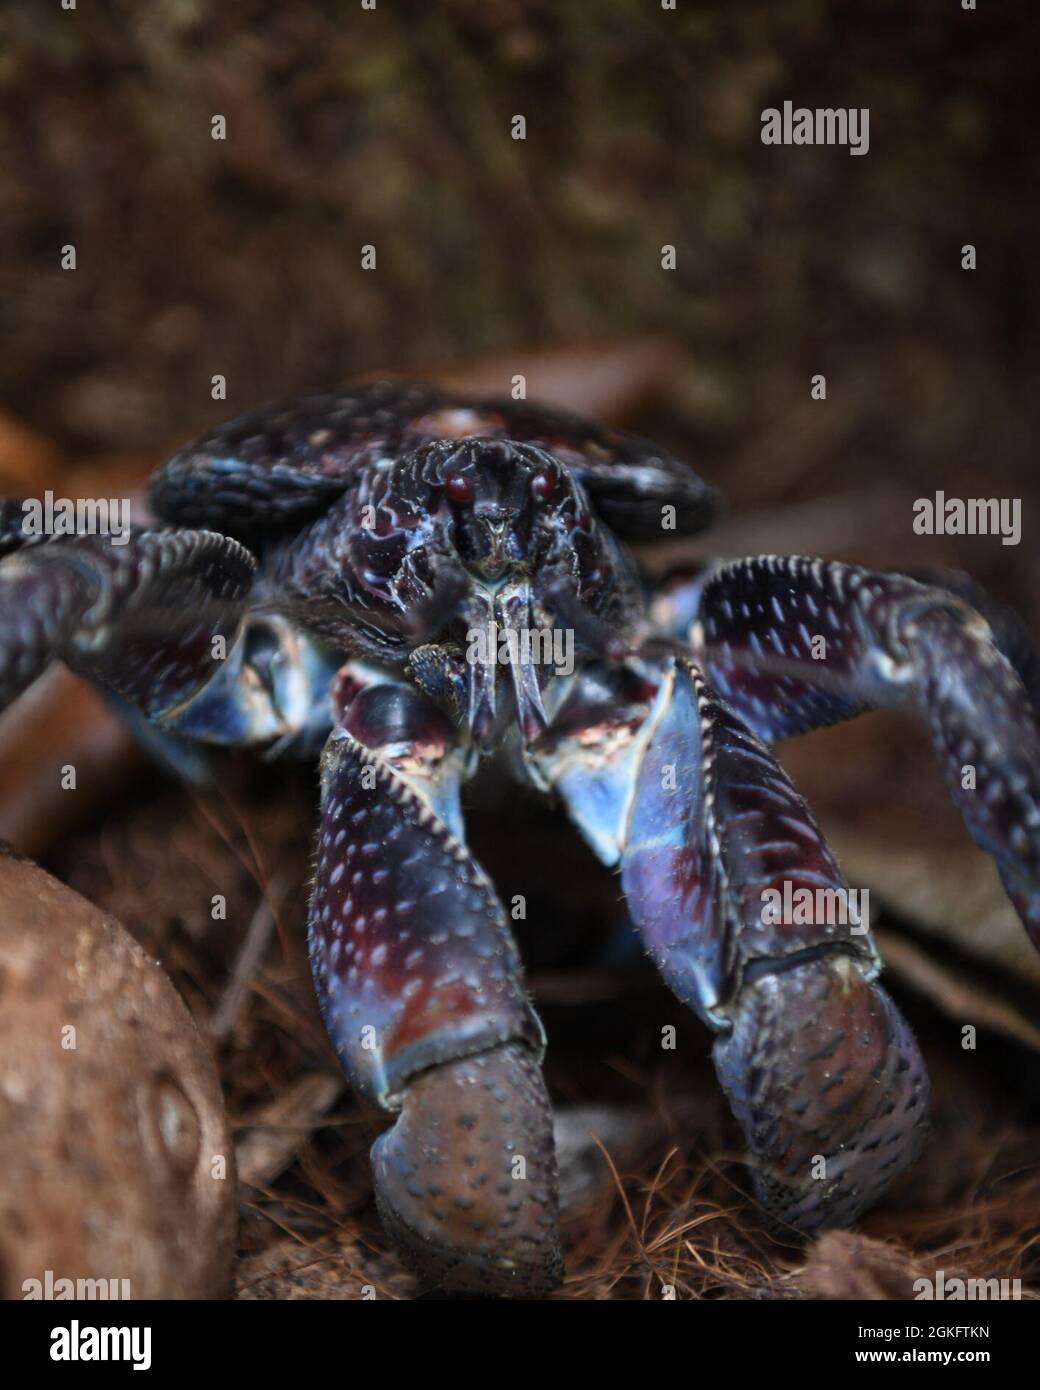 DIEGO GARCIA, British Indian Ocean Territory (April 11, 2021) – A coconut crab is photographed during the Bataan Memorial March April 11, 2021. U.S. and U.K. Service members participated in an 11 mile march along the beaches and through the jungles of Diego Garcia to commemorate the Bataan Death March that took place in the Philippines in April 1942 where 76,000 prisoners of war consisting of 66,000 Filipinos and 10,000 Americans were forced to walk 66 miles. Stock Photo